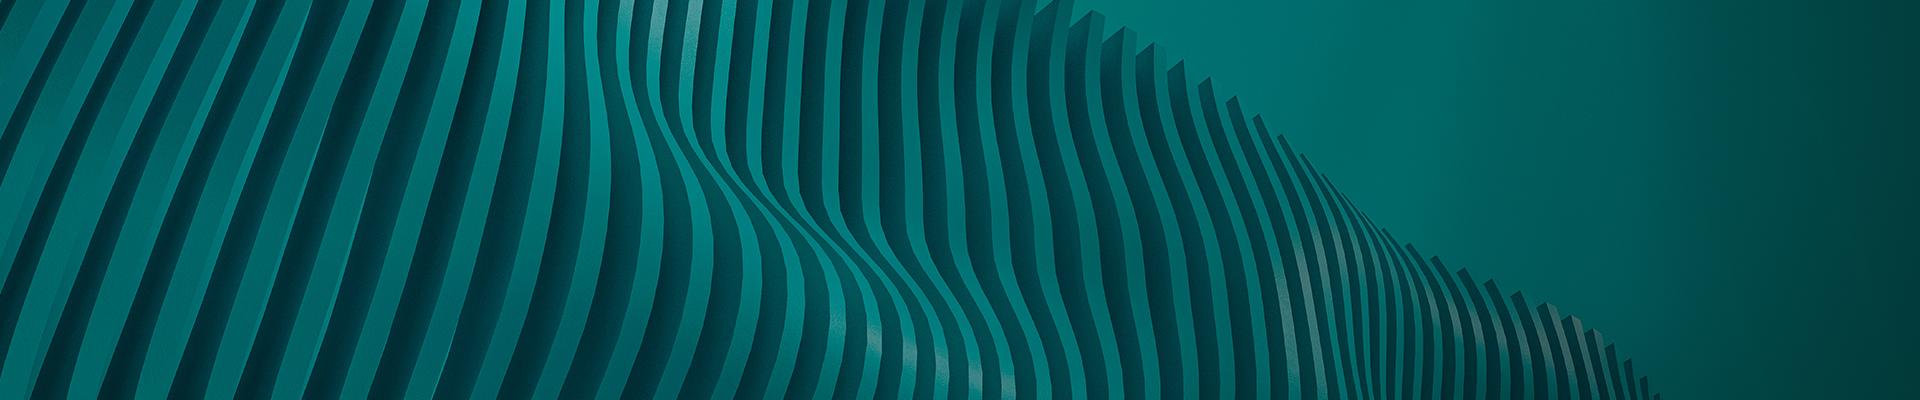 Abstract green wave graphics 